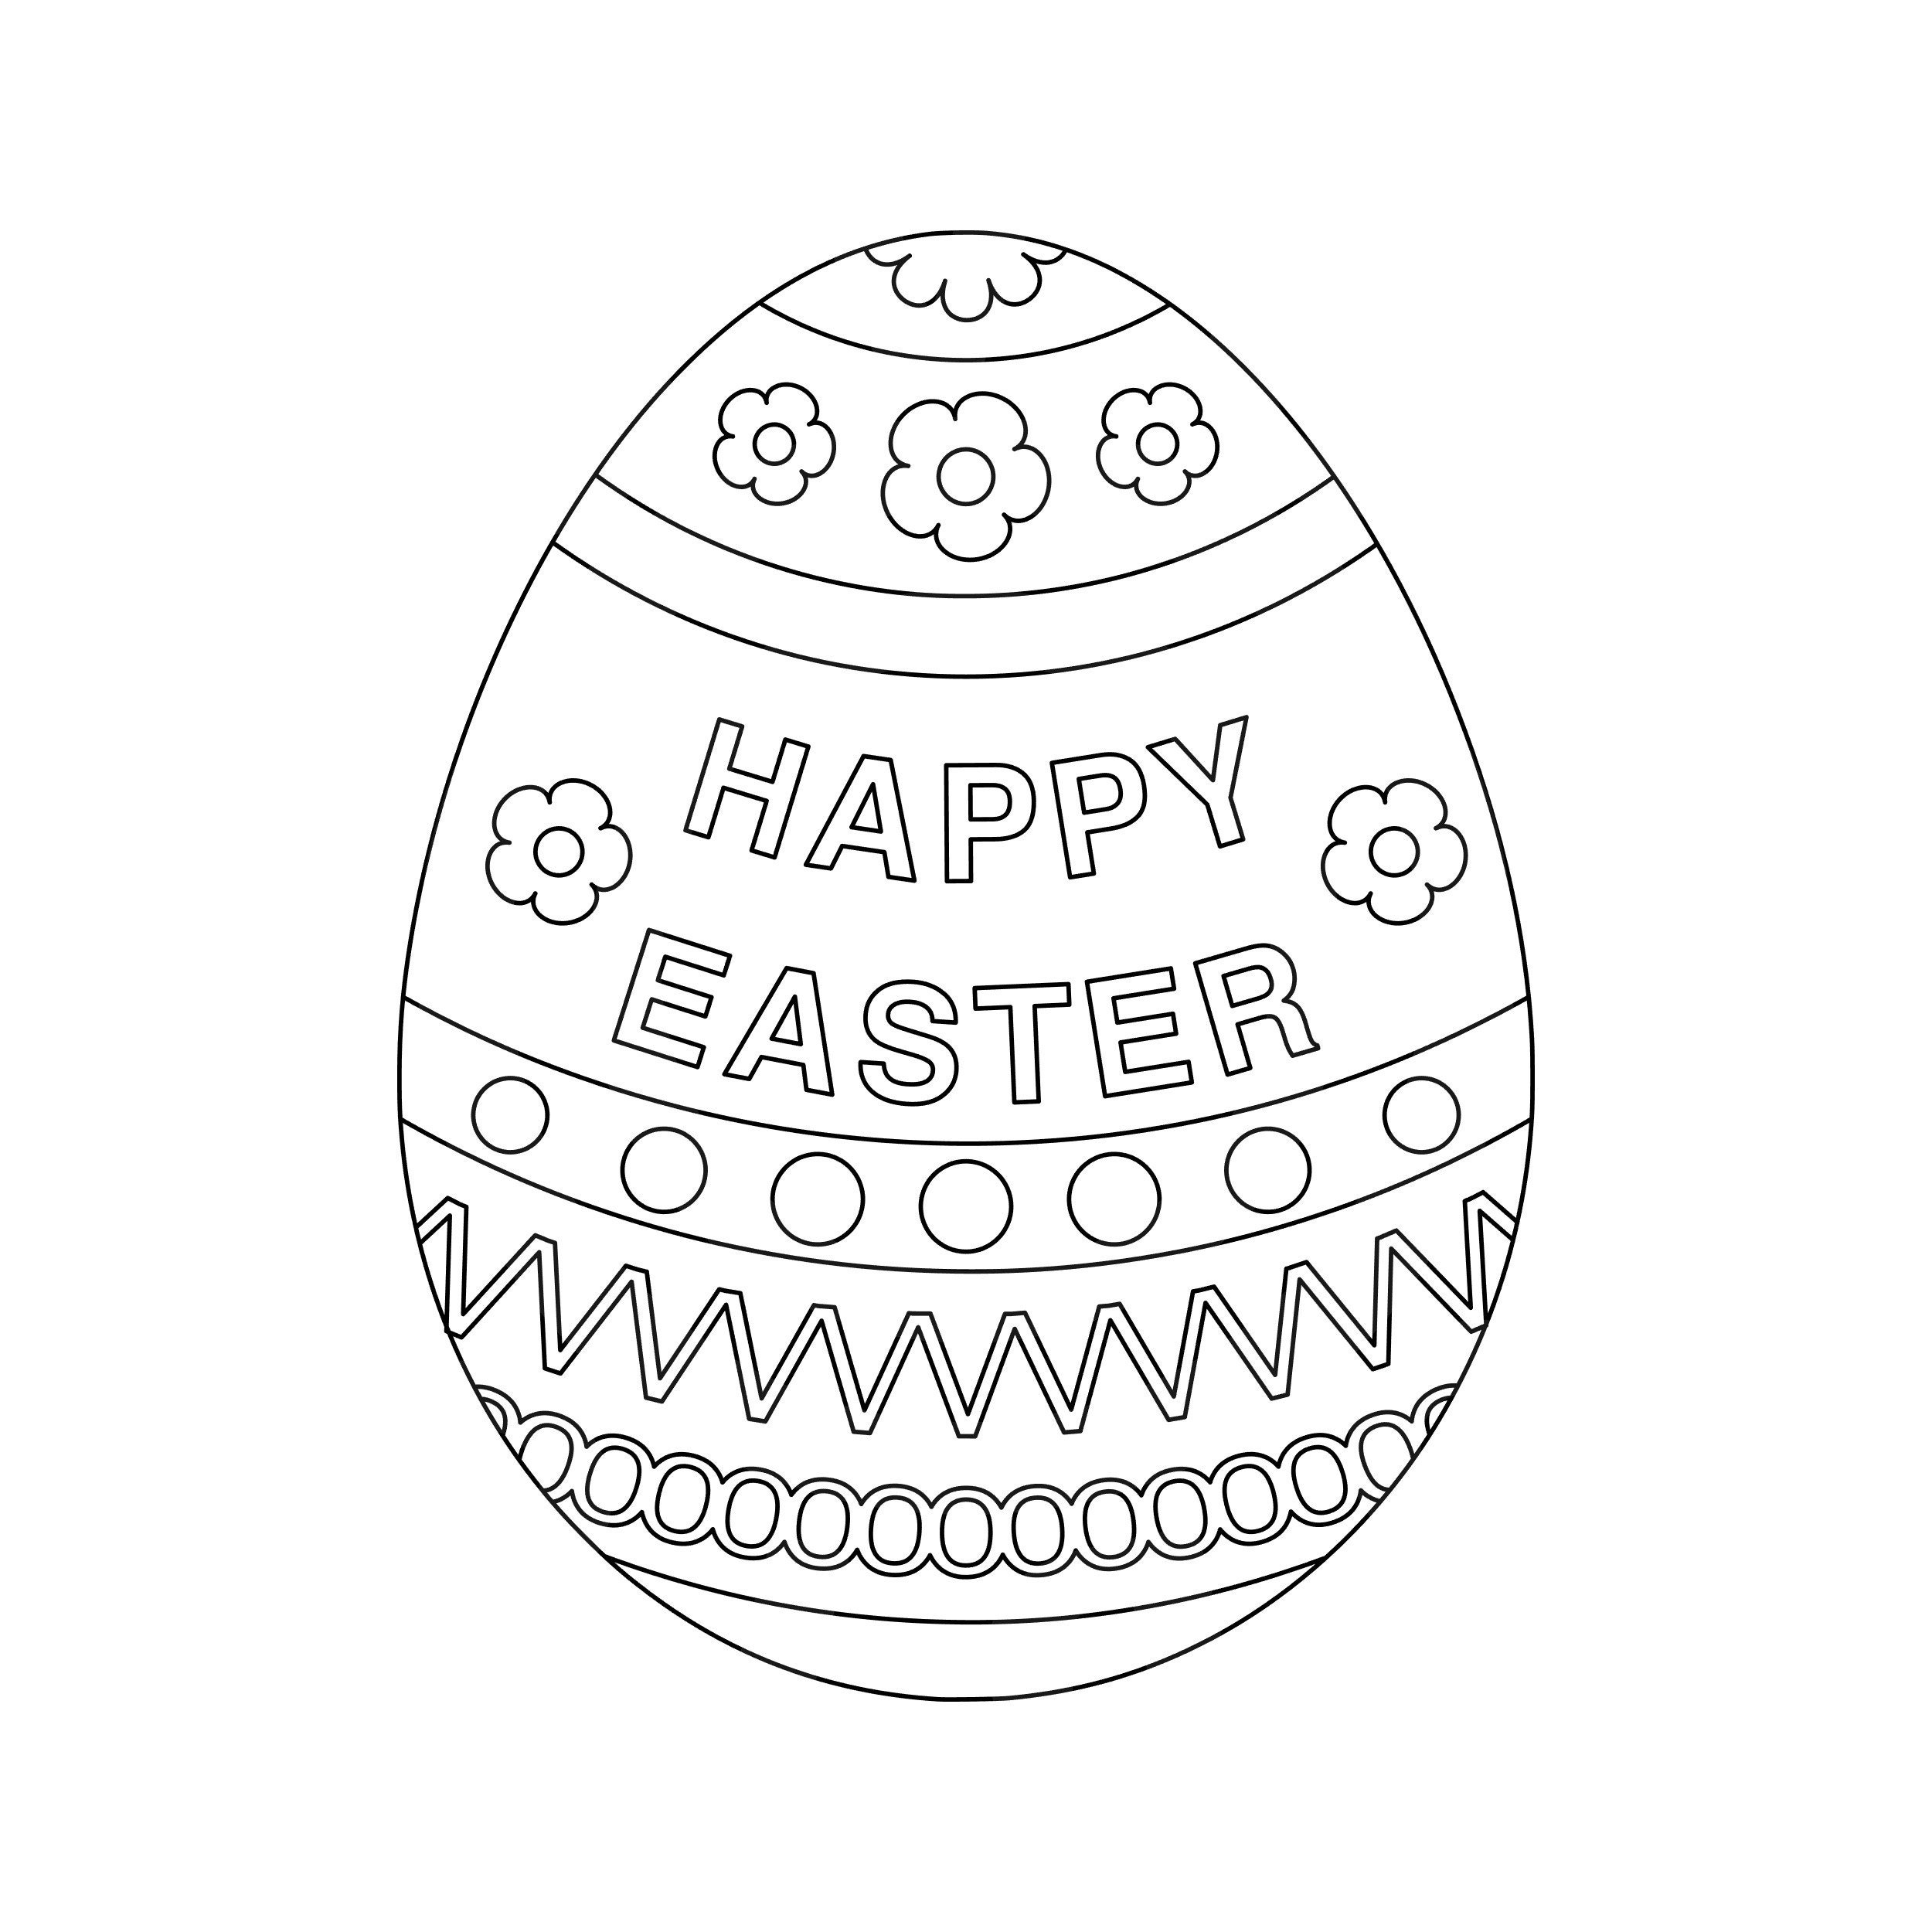 Easter Egg Coloring Page Easter Egg Colouring in Pageeaster - Etsy